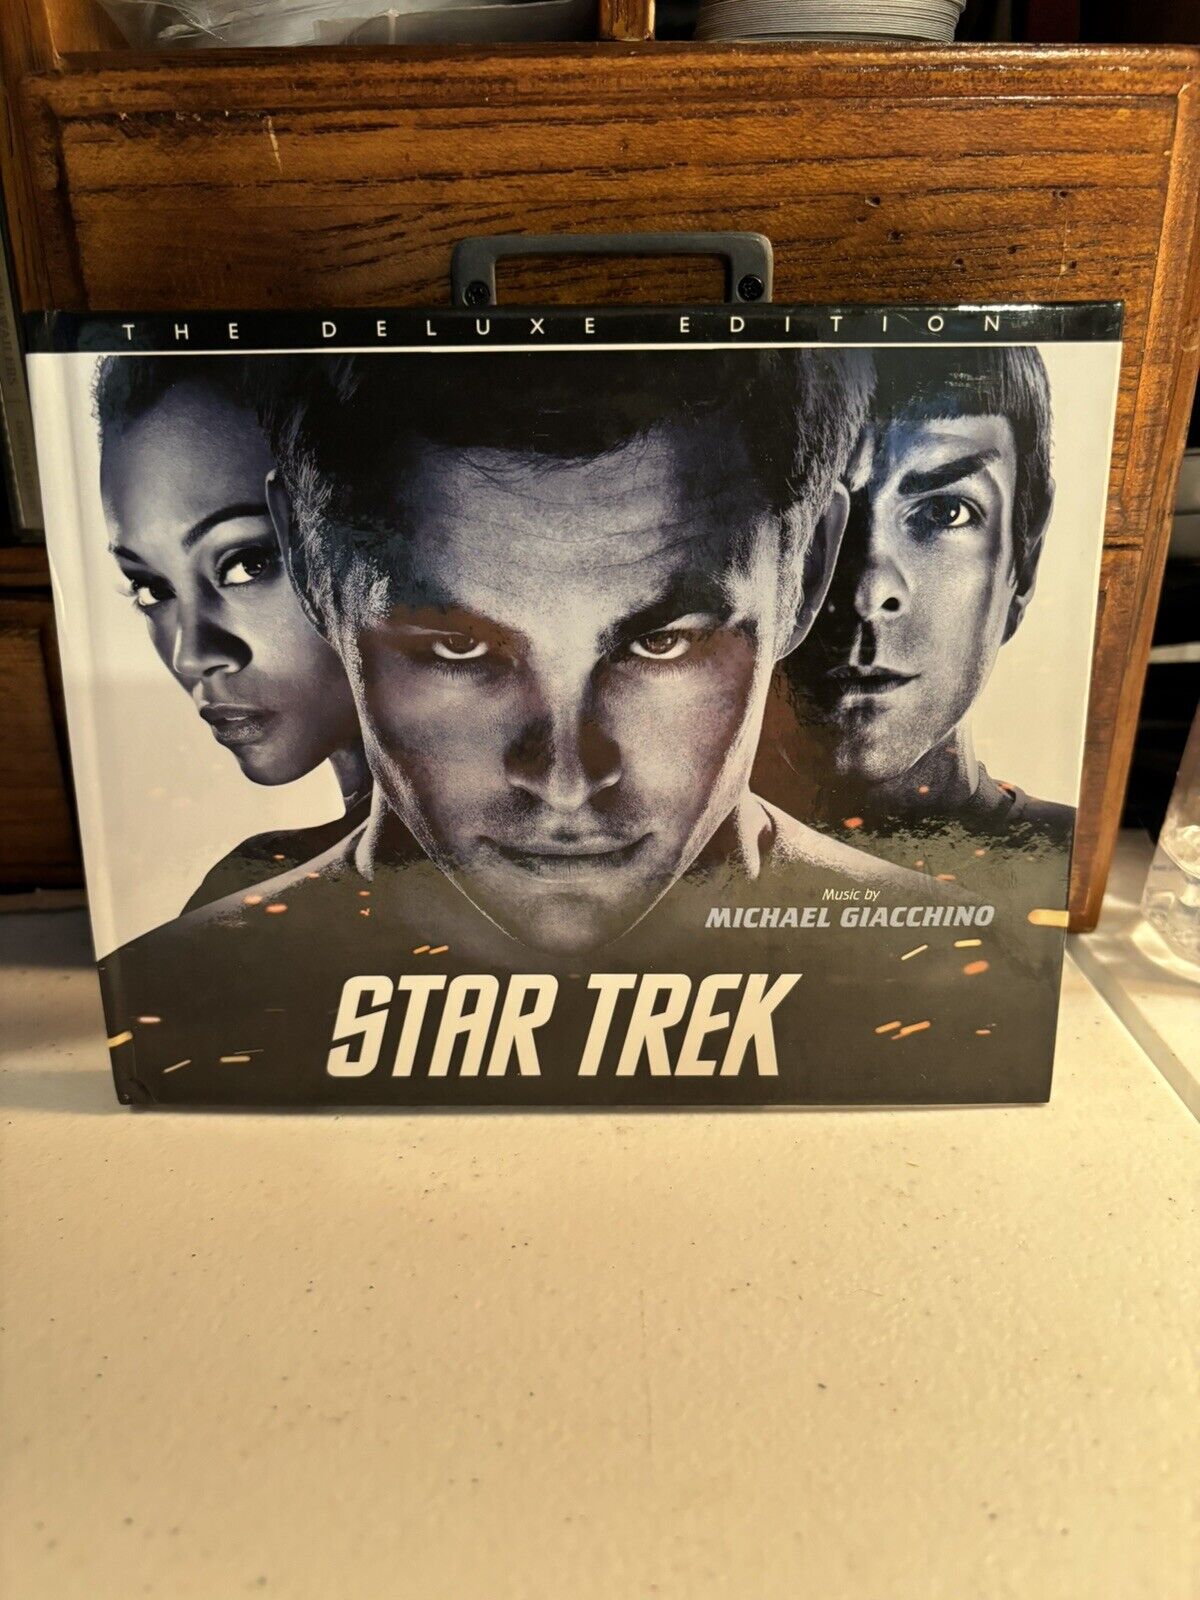 STAR TREK 2009 The Deluxe Edition Varese Sarabande 2CD booklet Giacchino LIMITED